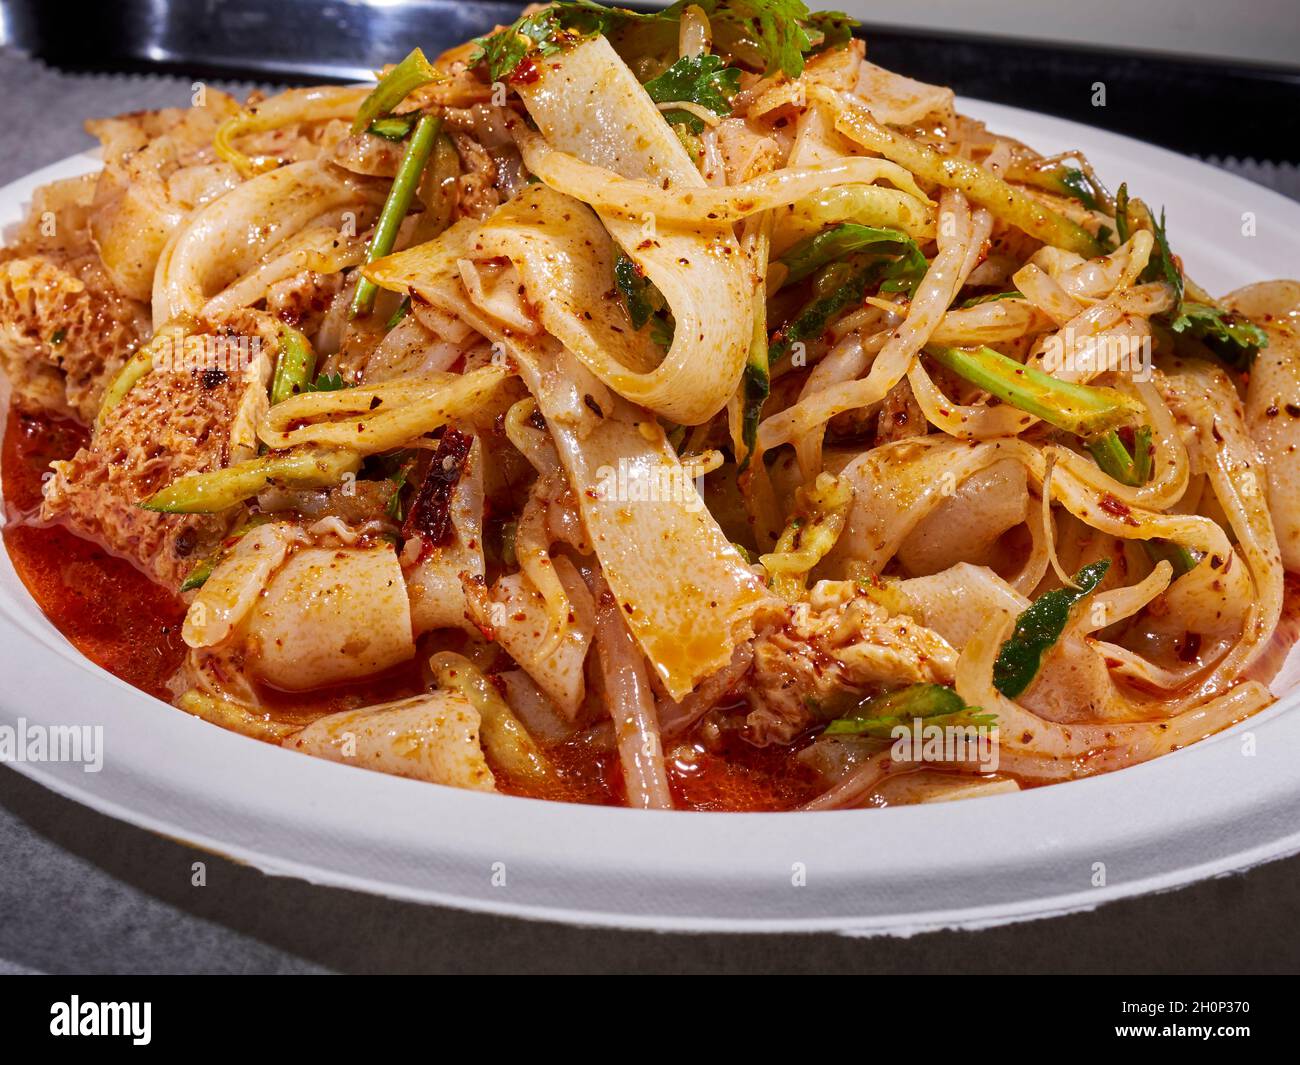 Handmade noodles in spicy sauce from Tarim Uyghur Cuisine in the New World Mall, Flushing, Queens, NY, USA Stock Photo